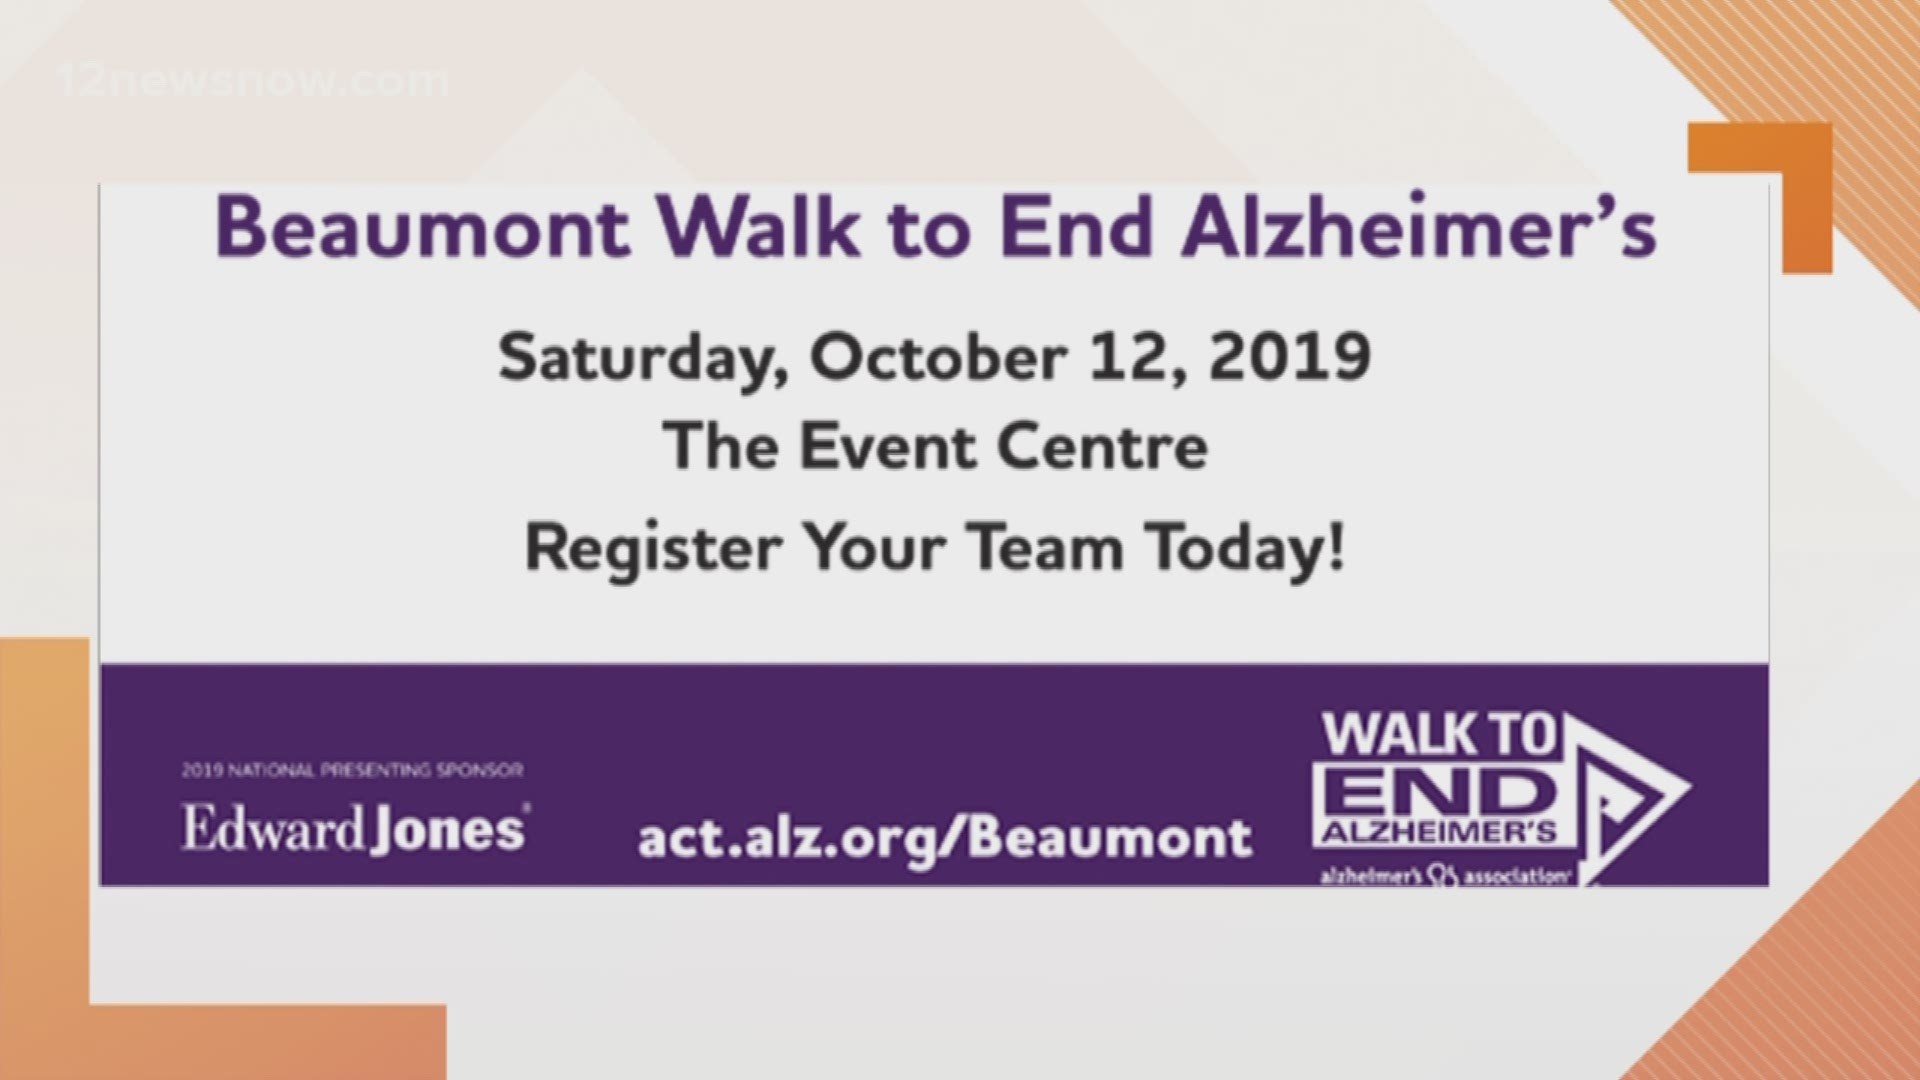 The Alzheimer's Association is hosting the event on Saturday, October 12, 2019.